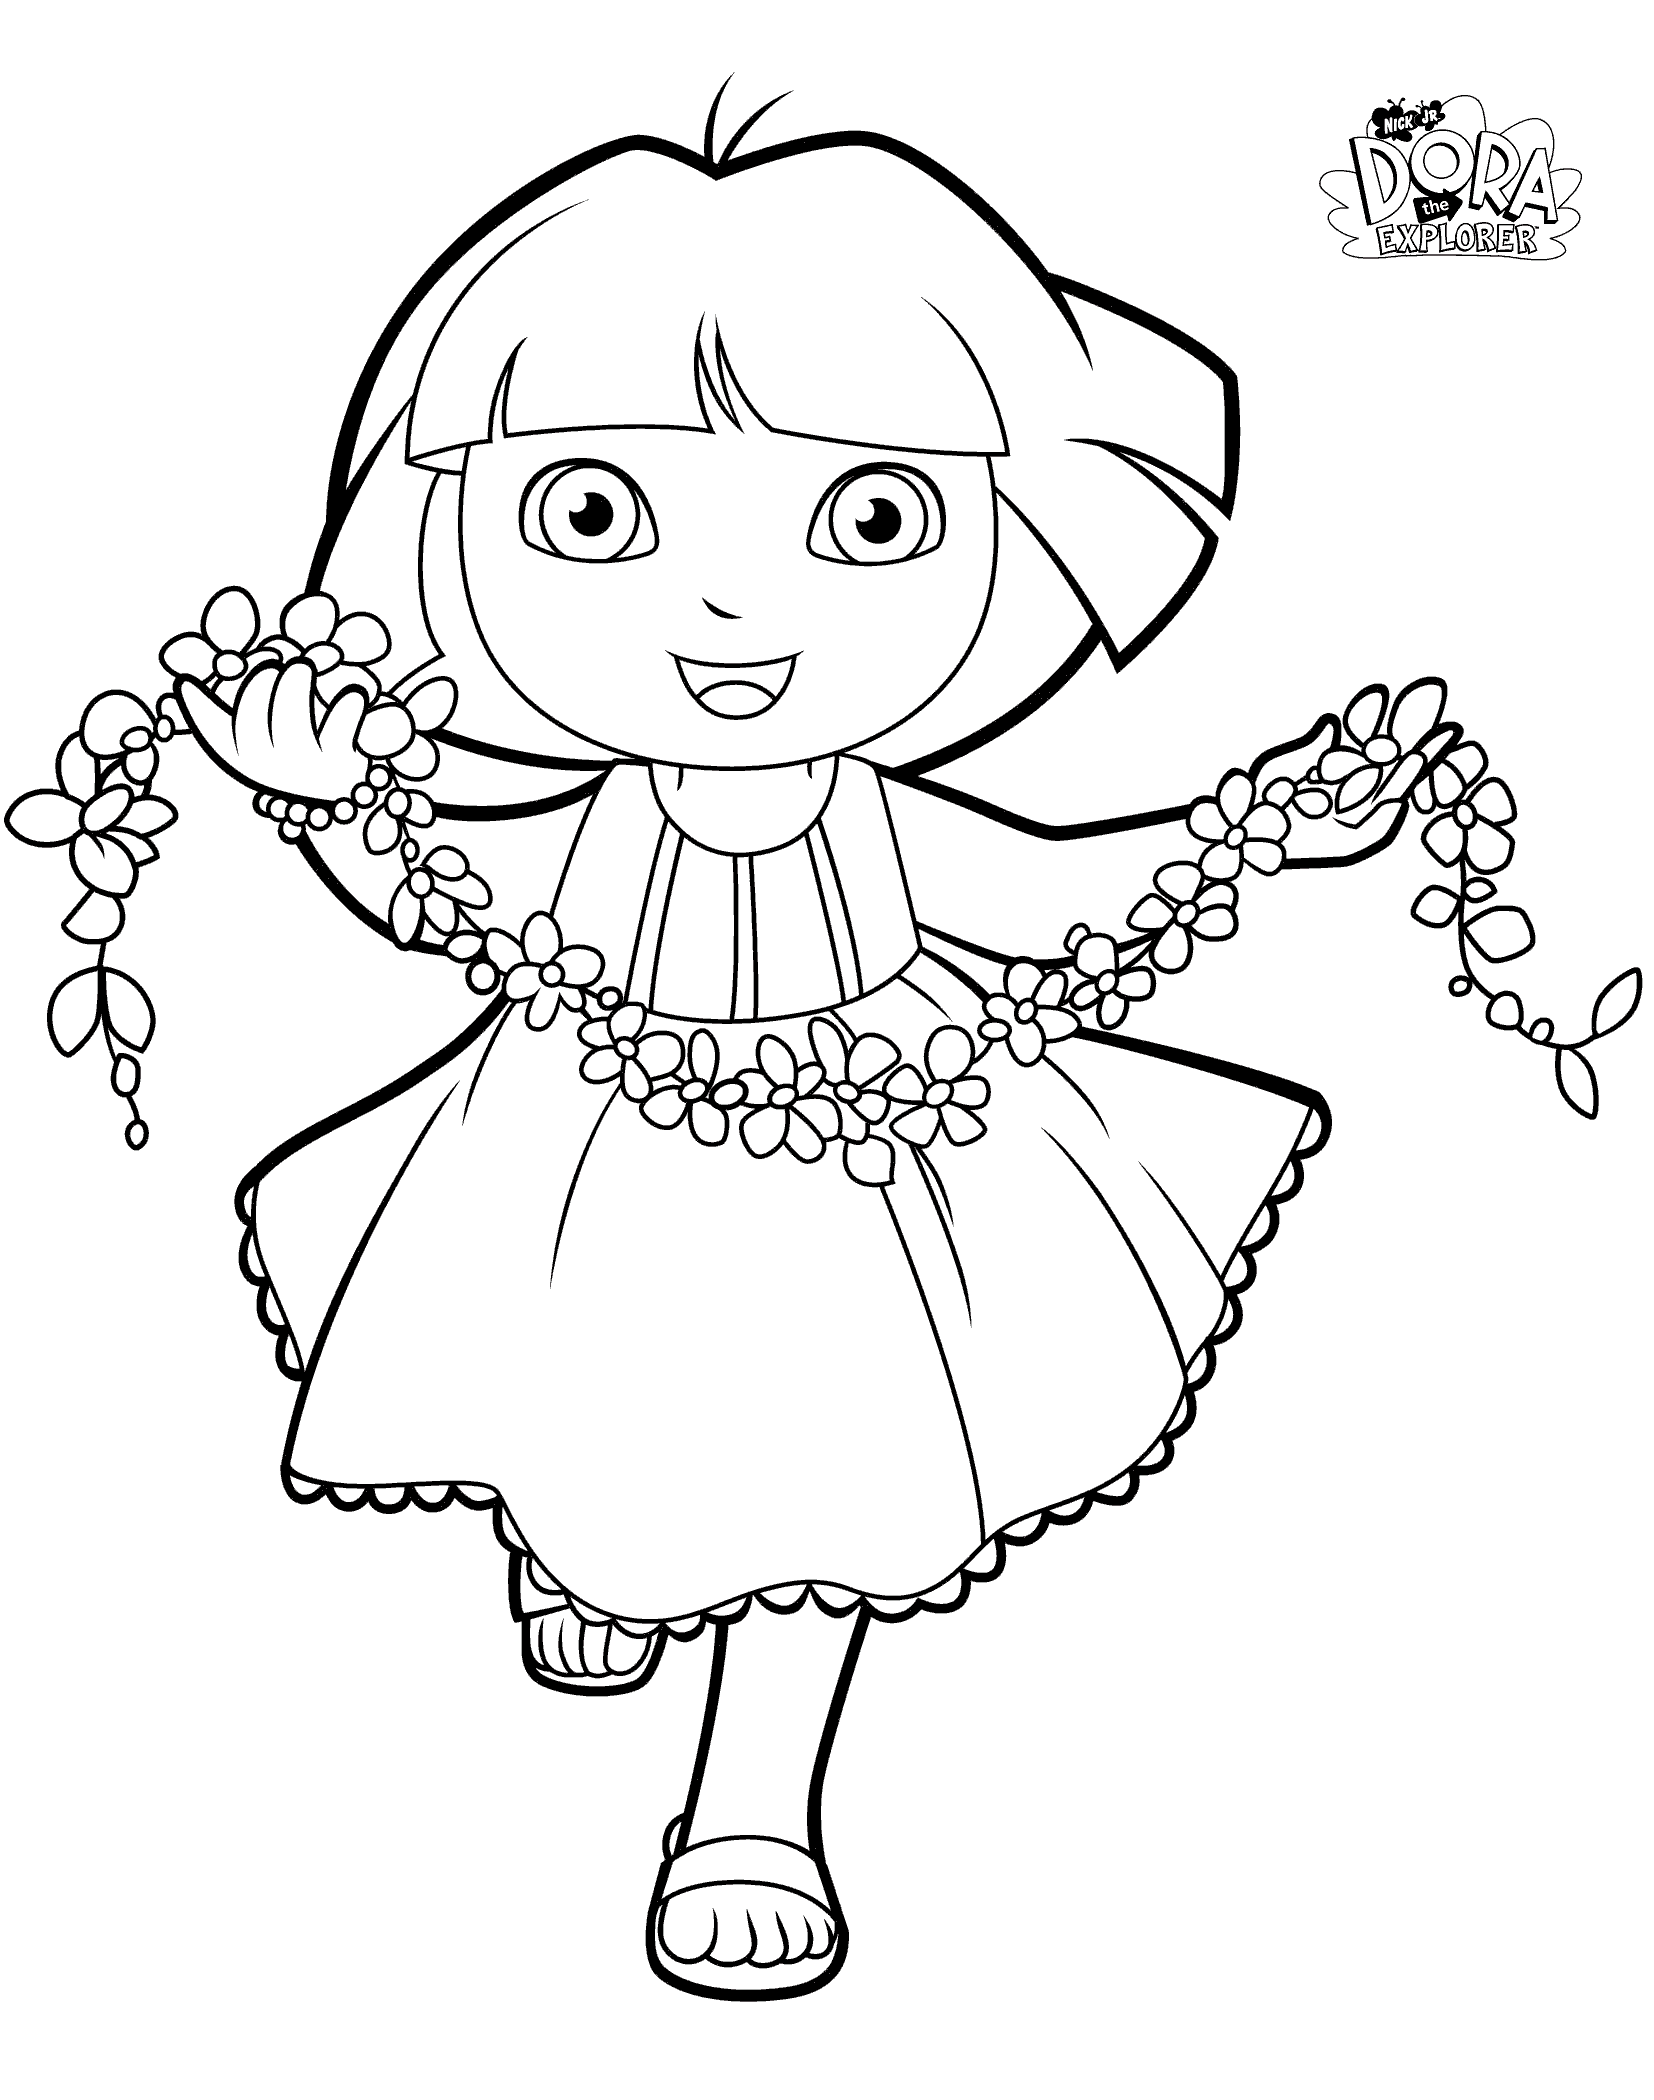 Coloring Pages For Dora The Explorer Star Coloring Pages Free Coloring